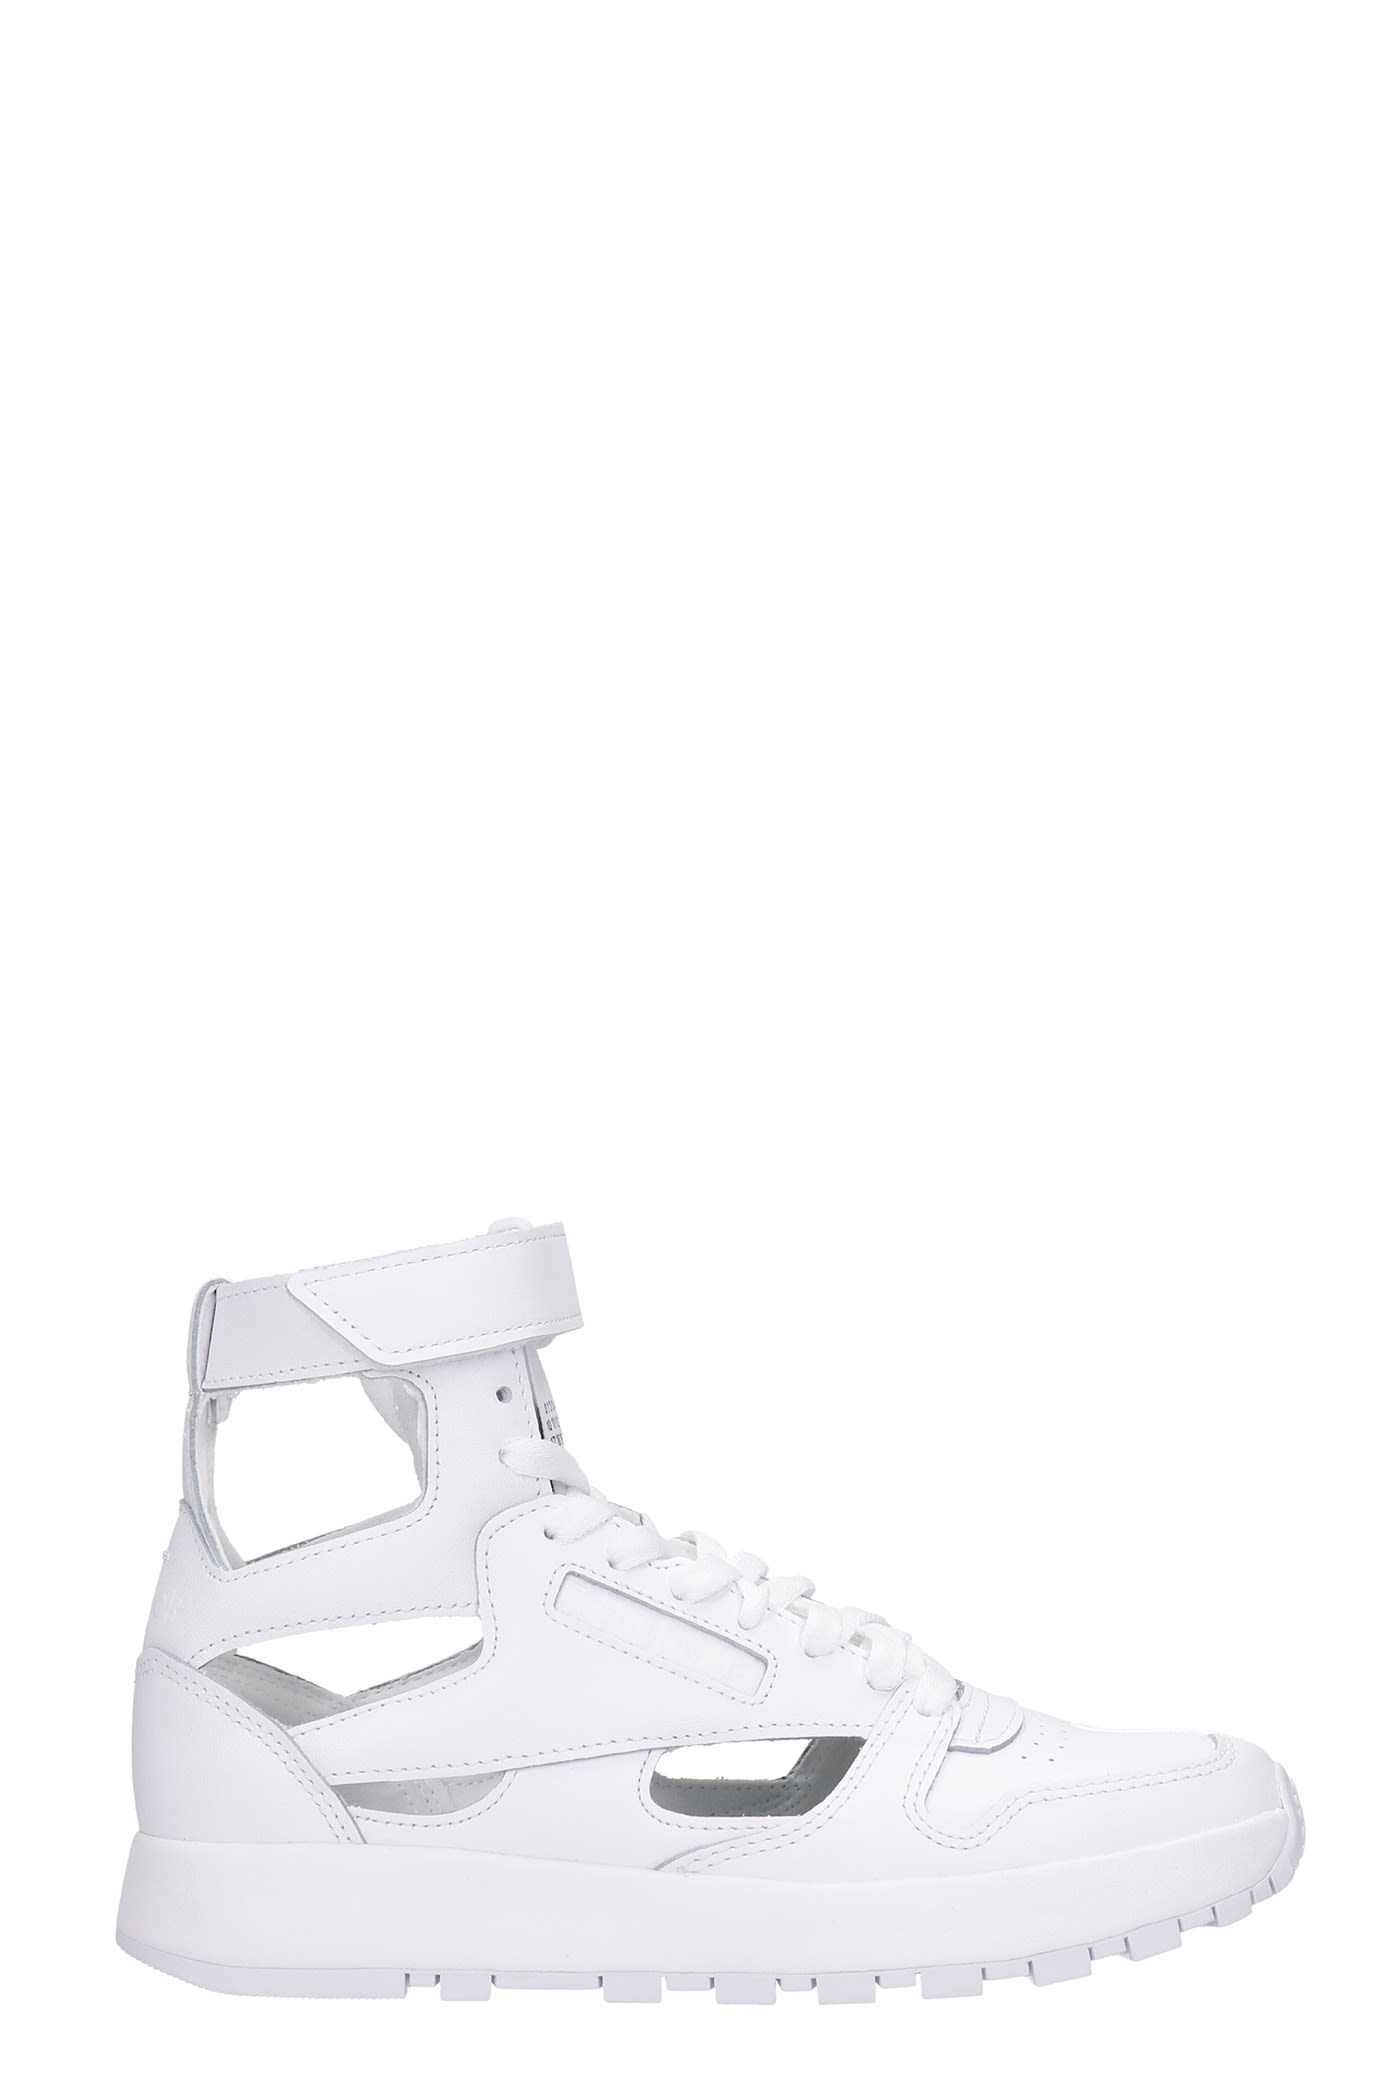 Maison Margiela Project Cl 0 Sneakers In White Leather